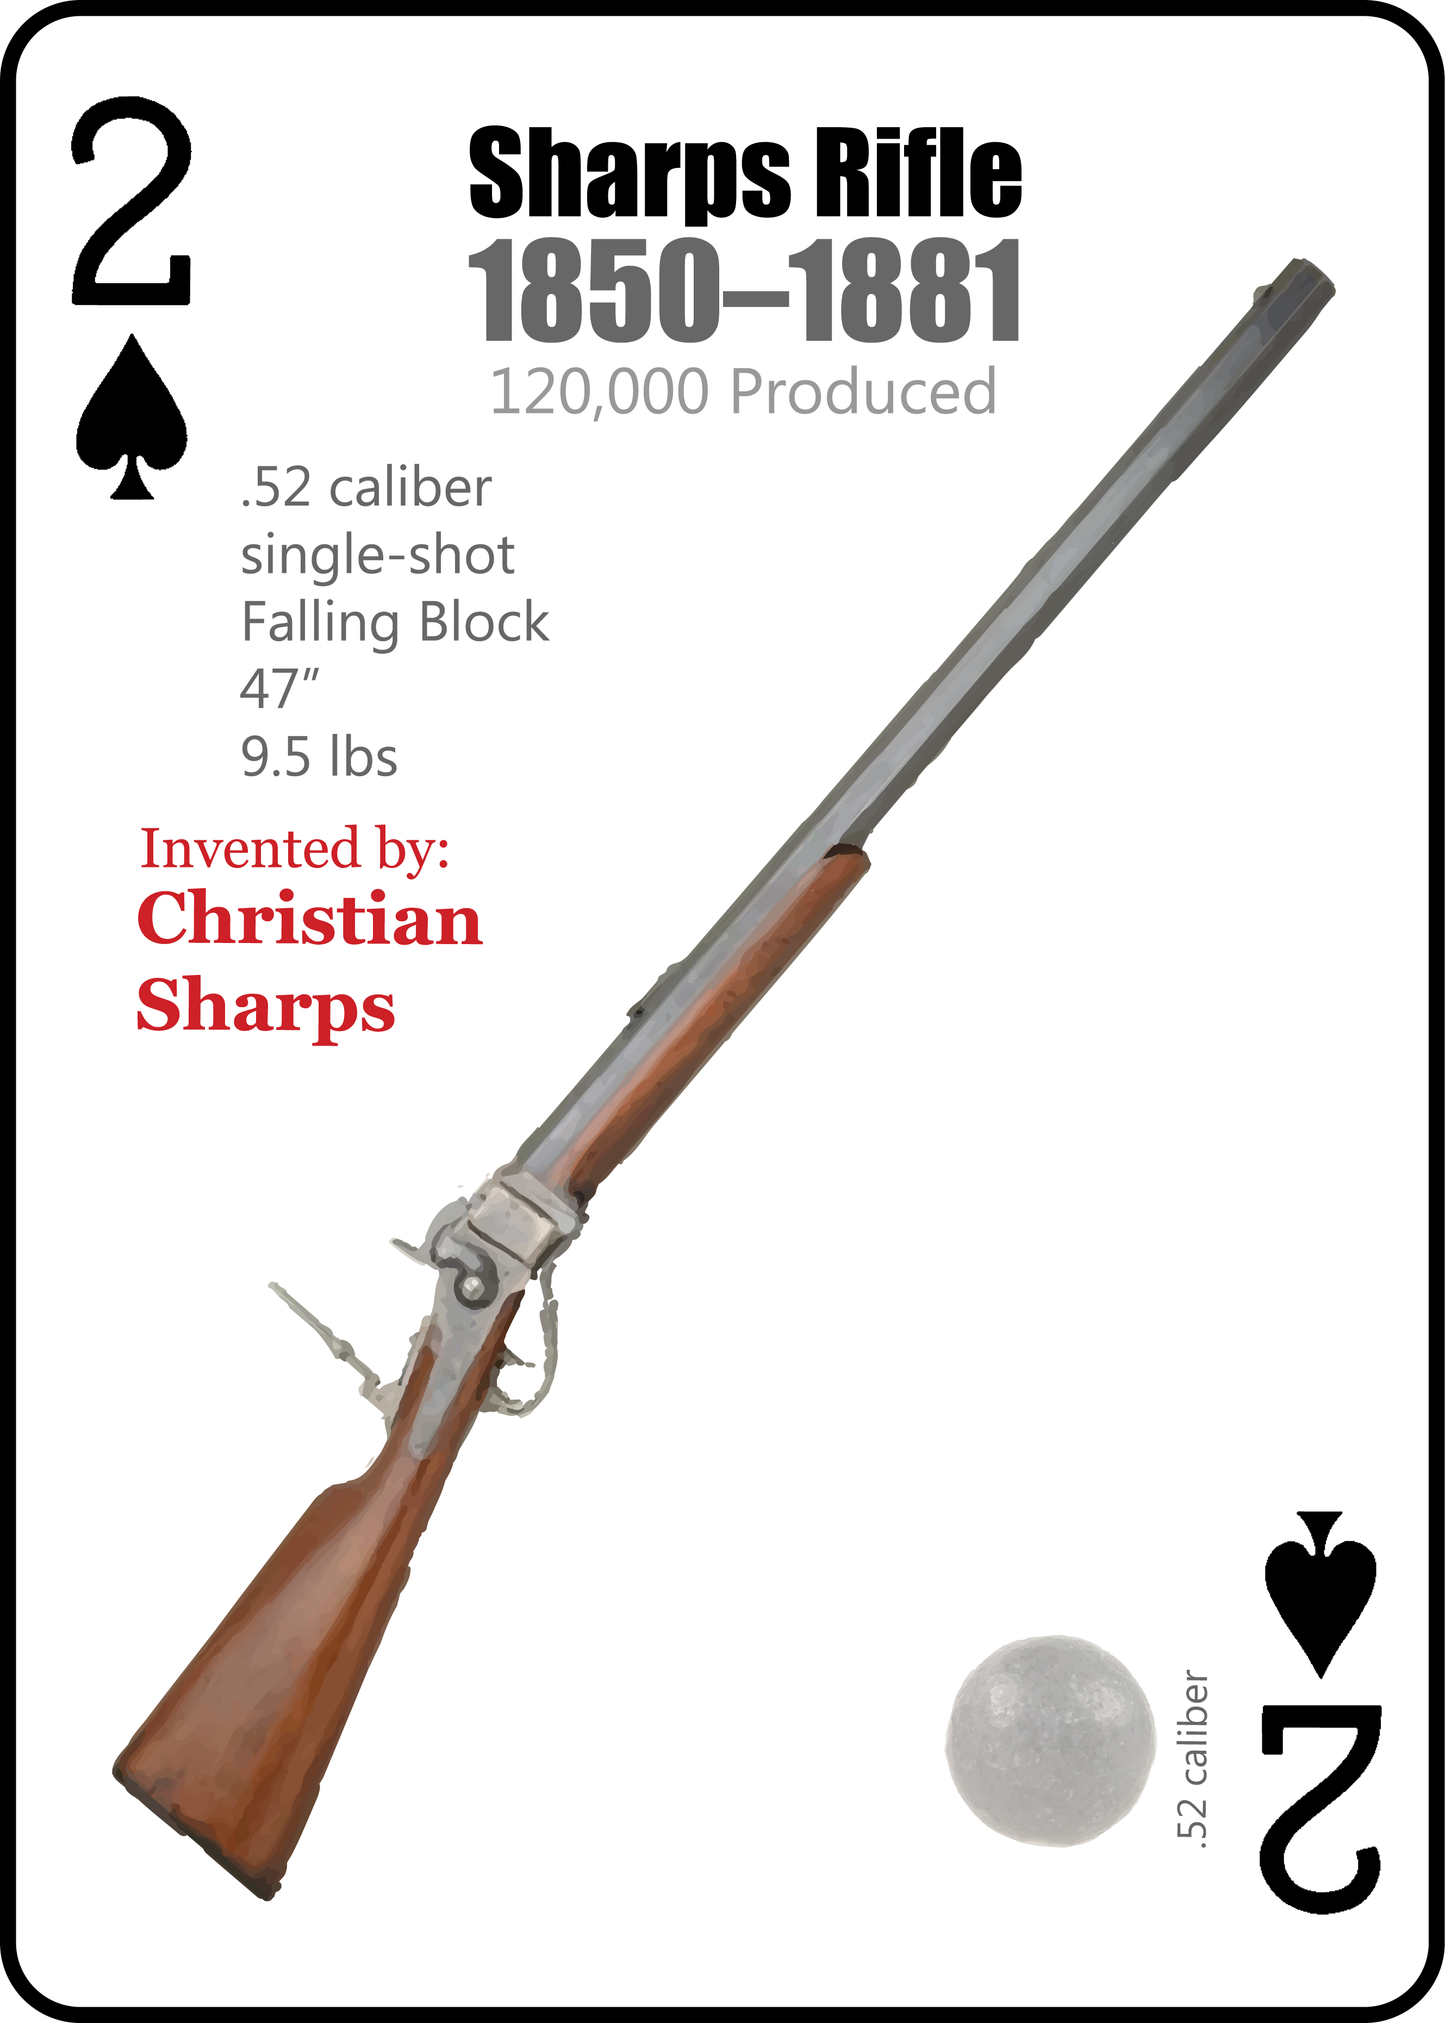 Old West Guns Playing Card Deck